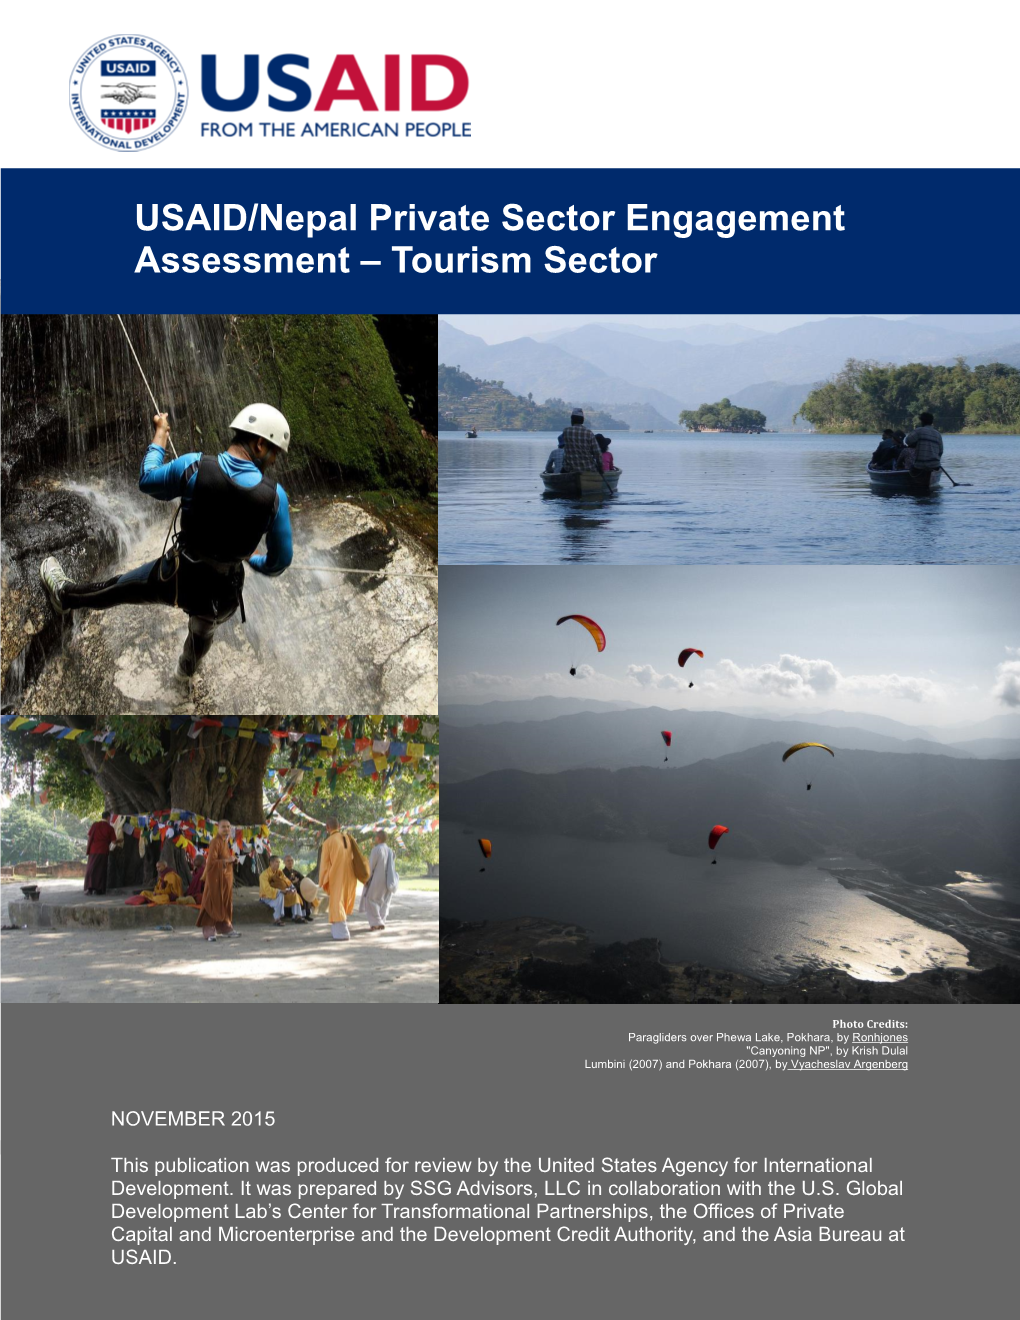 USAID/Nepal Private Sector Engagement Assessment – Tourism Sector